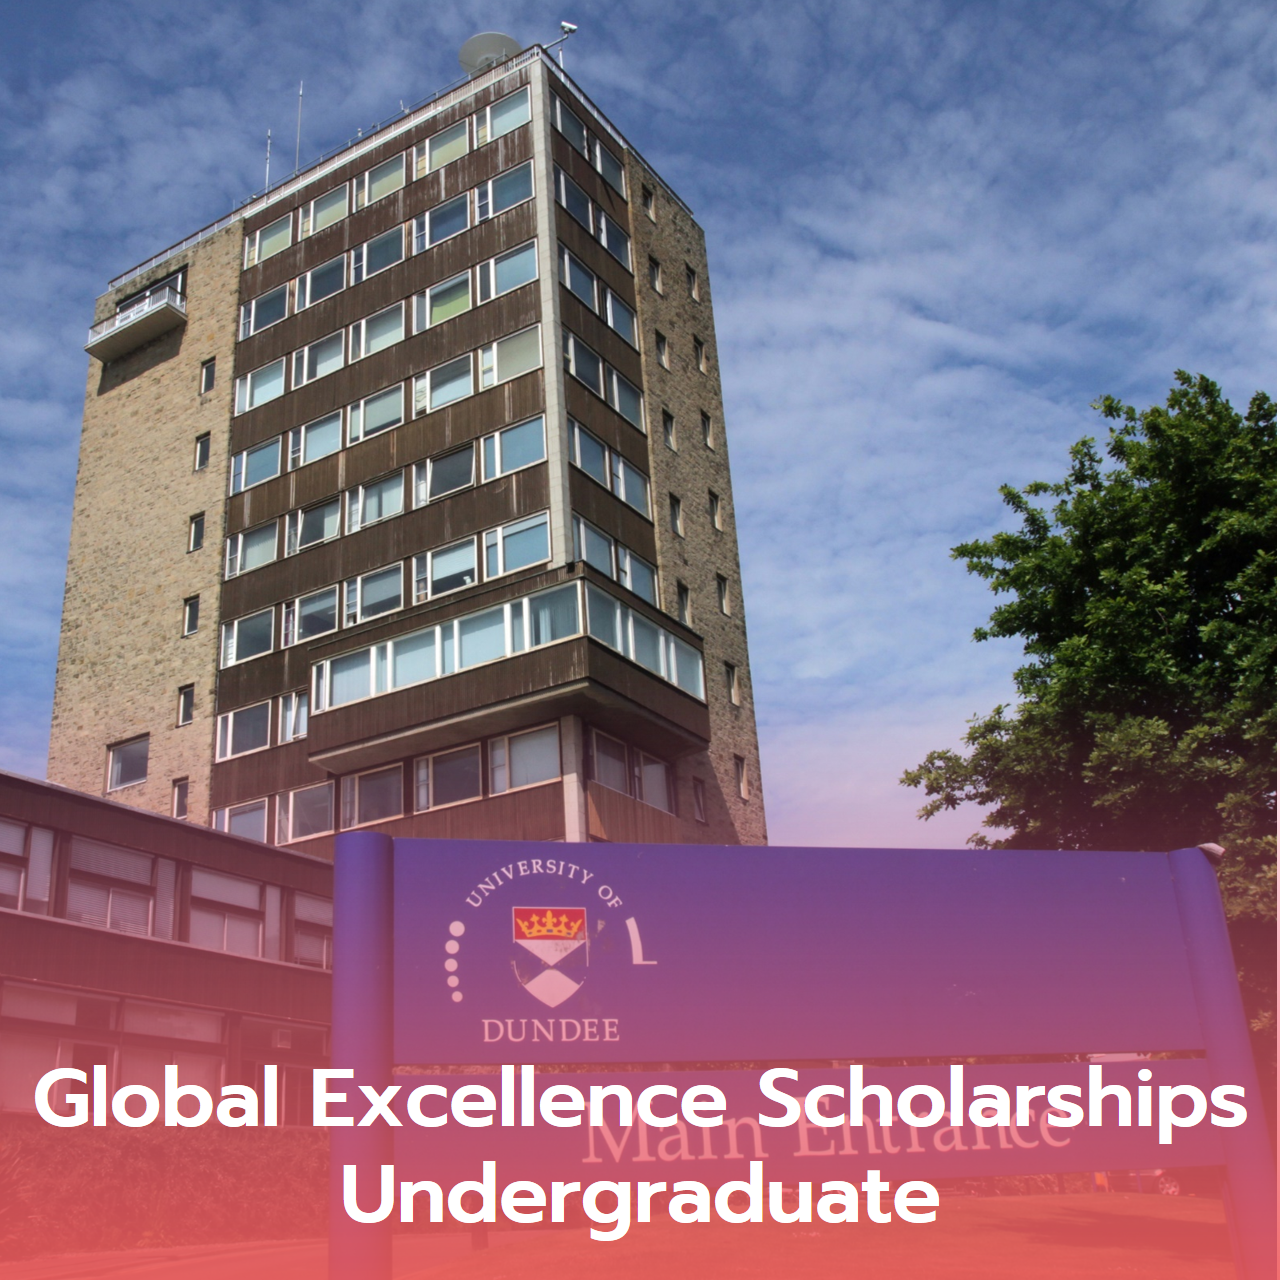  Global Excellence Scholarships Undergraduate